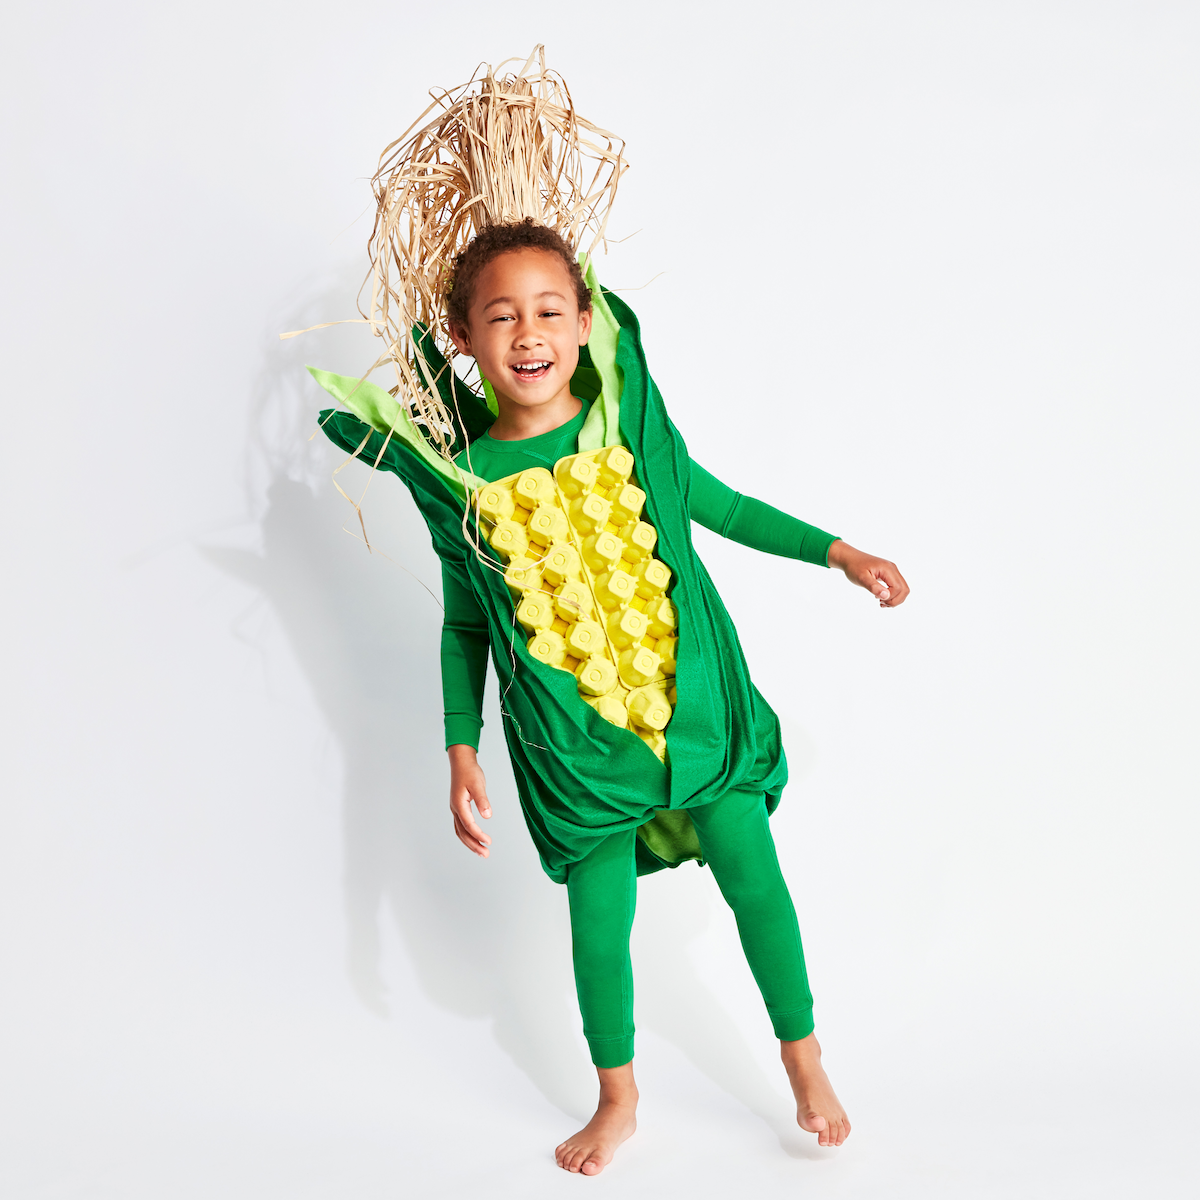 Corn (Kid): A kid wearing a green outfit with DIY corn embellishments